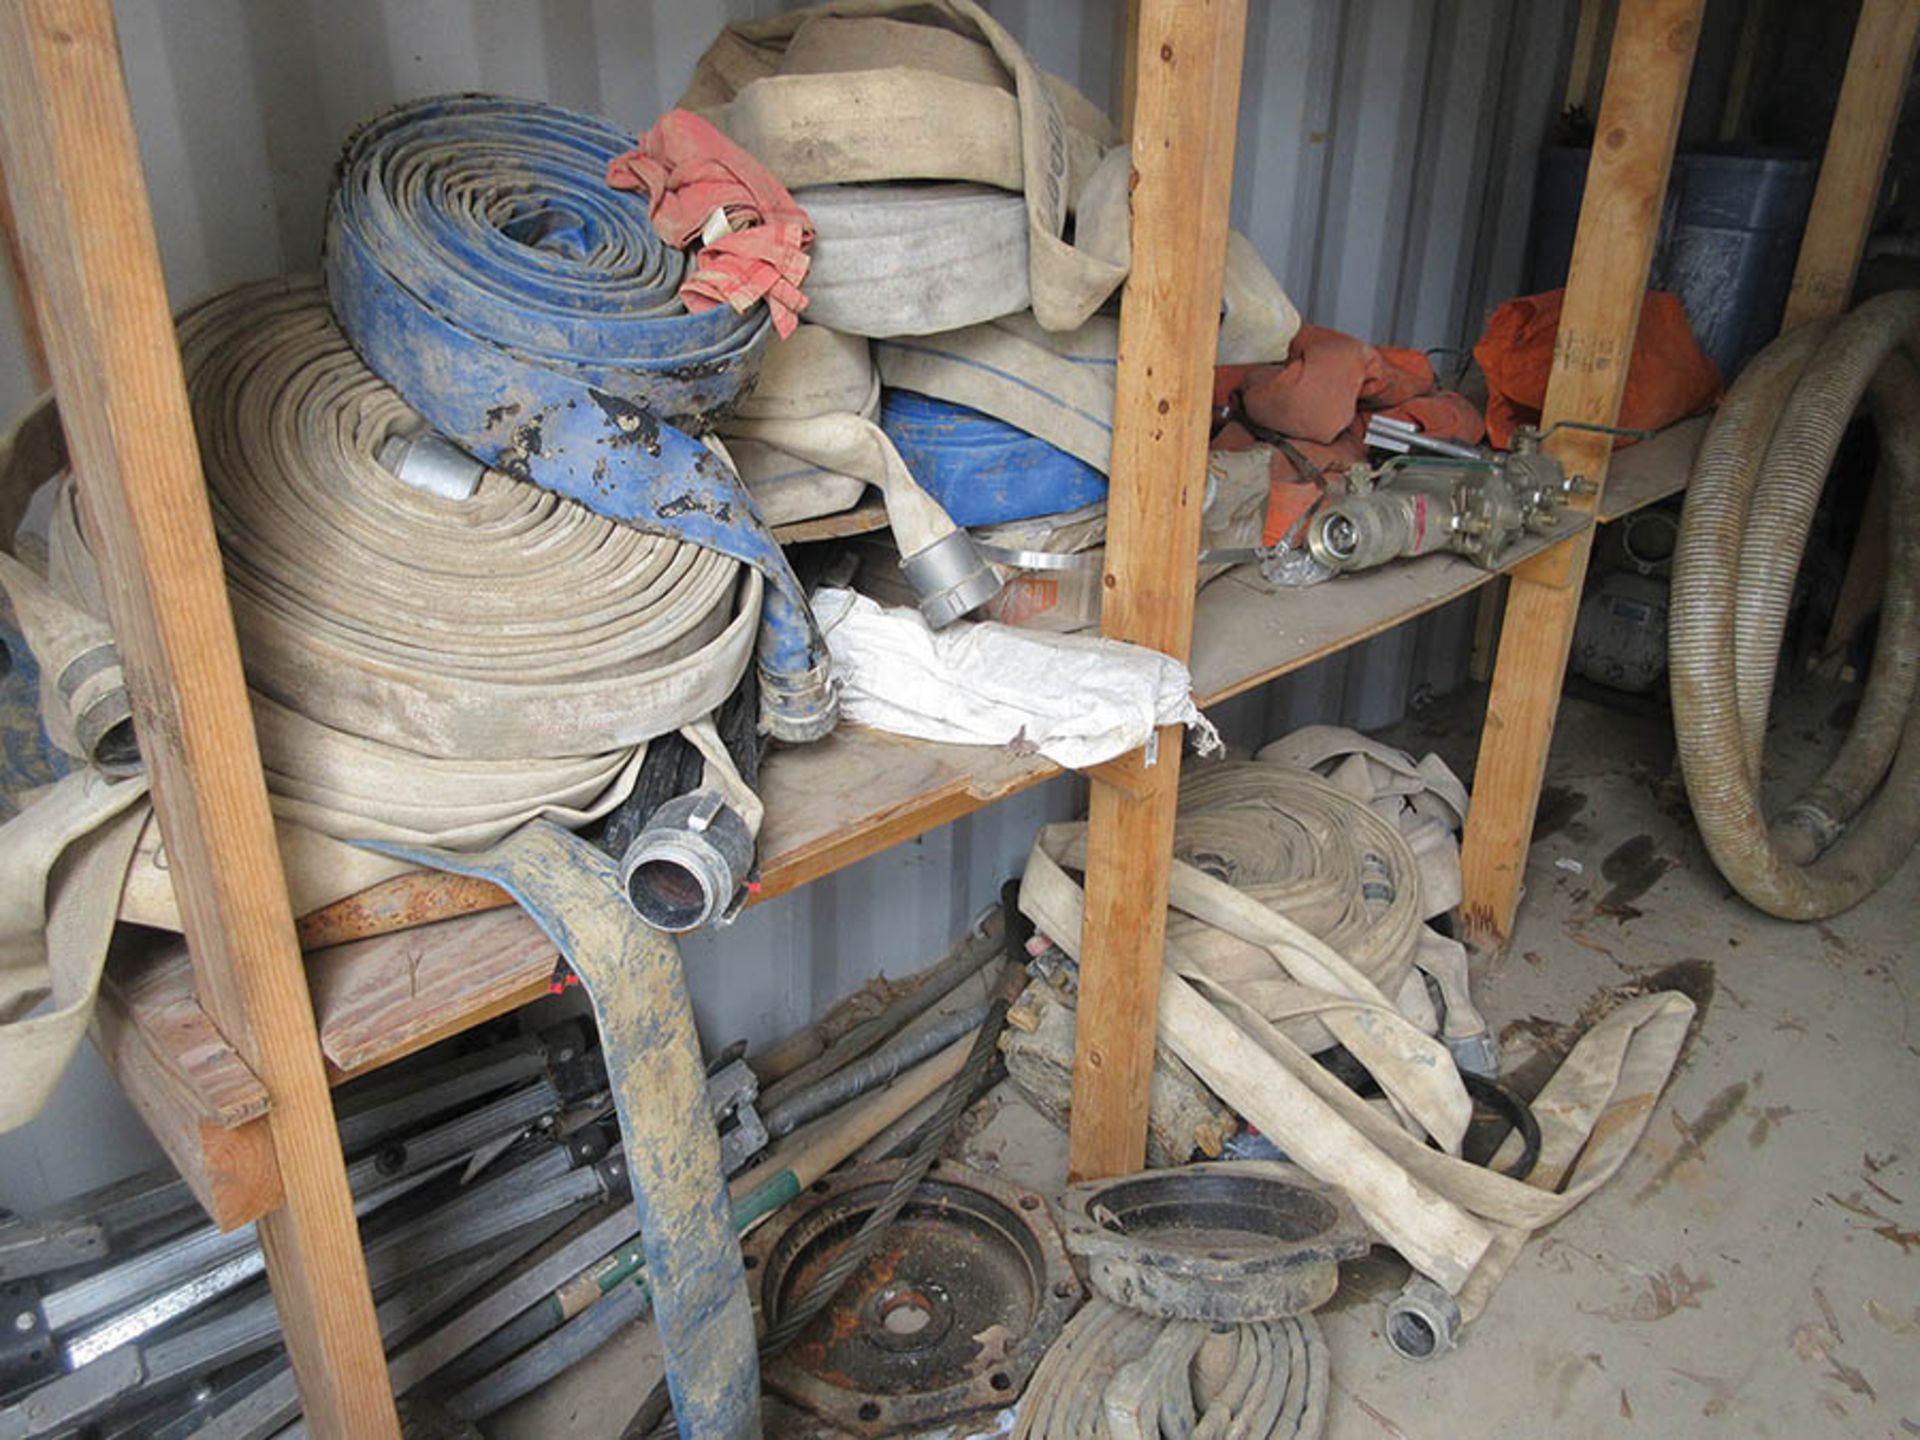 CONTENTS OF CONTAINER - ASSORTED DISCHARGE HOSE, TORCH HOSES, DRILL, AND FISH TAPE SPOOL